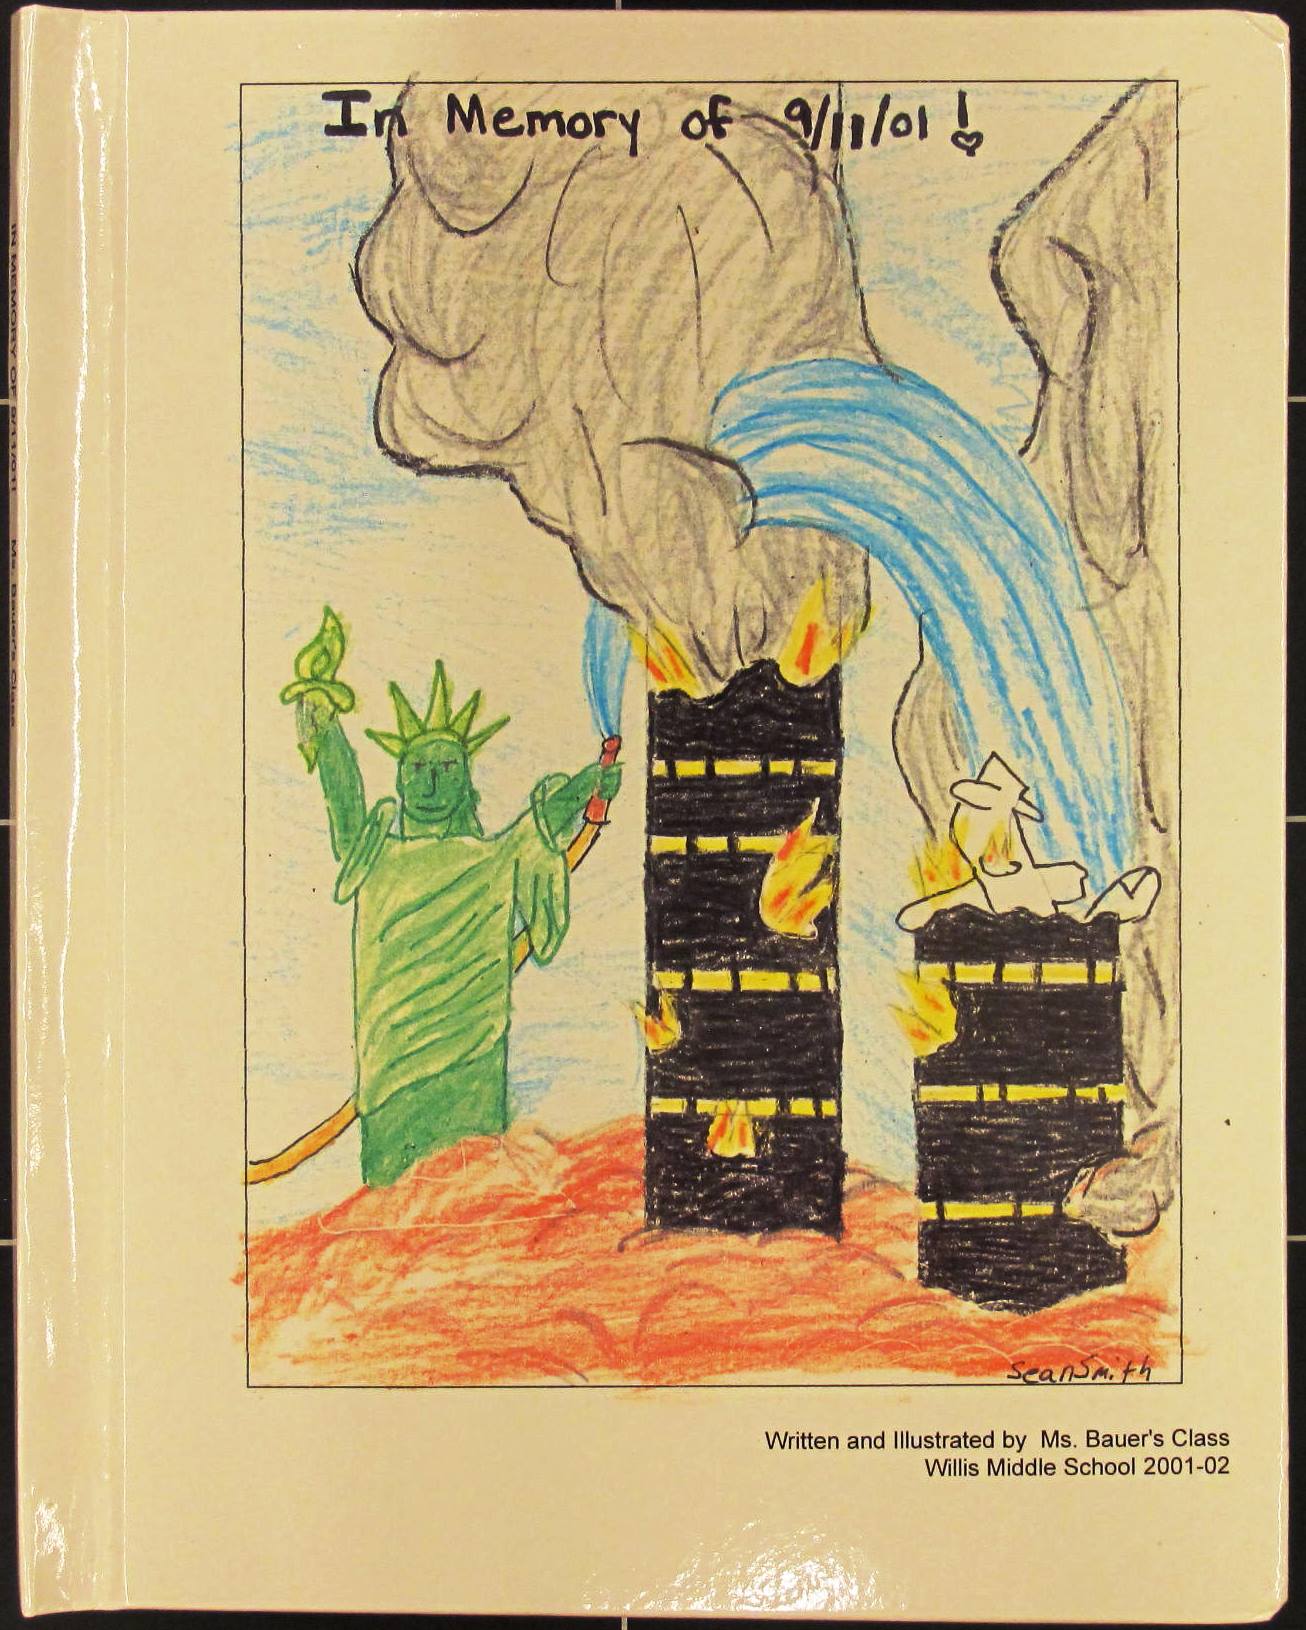  "In Memory of 9/11/01" written and illustrated by Ms Bauer's Class, Willis Middle School 2001-02. DO.238084